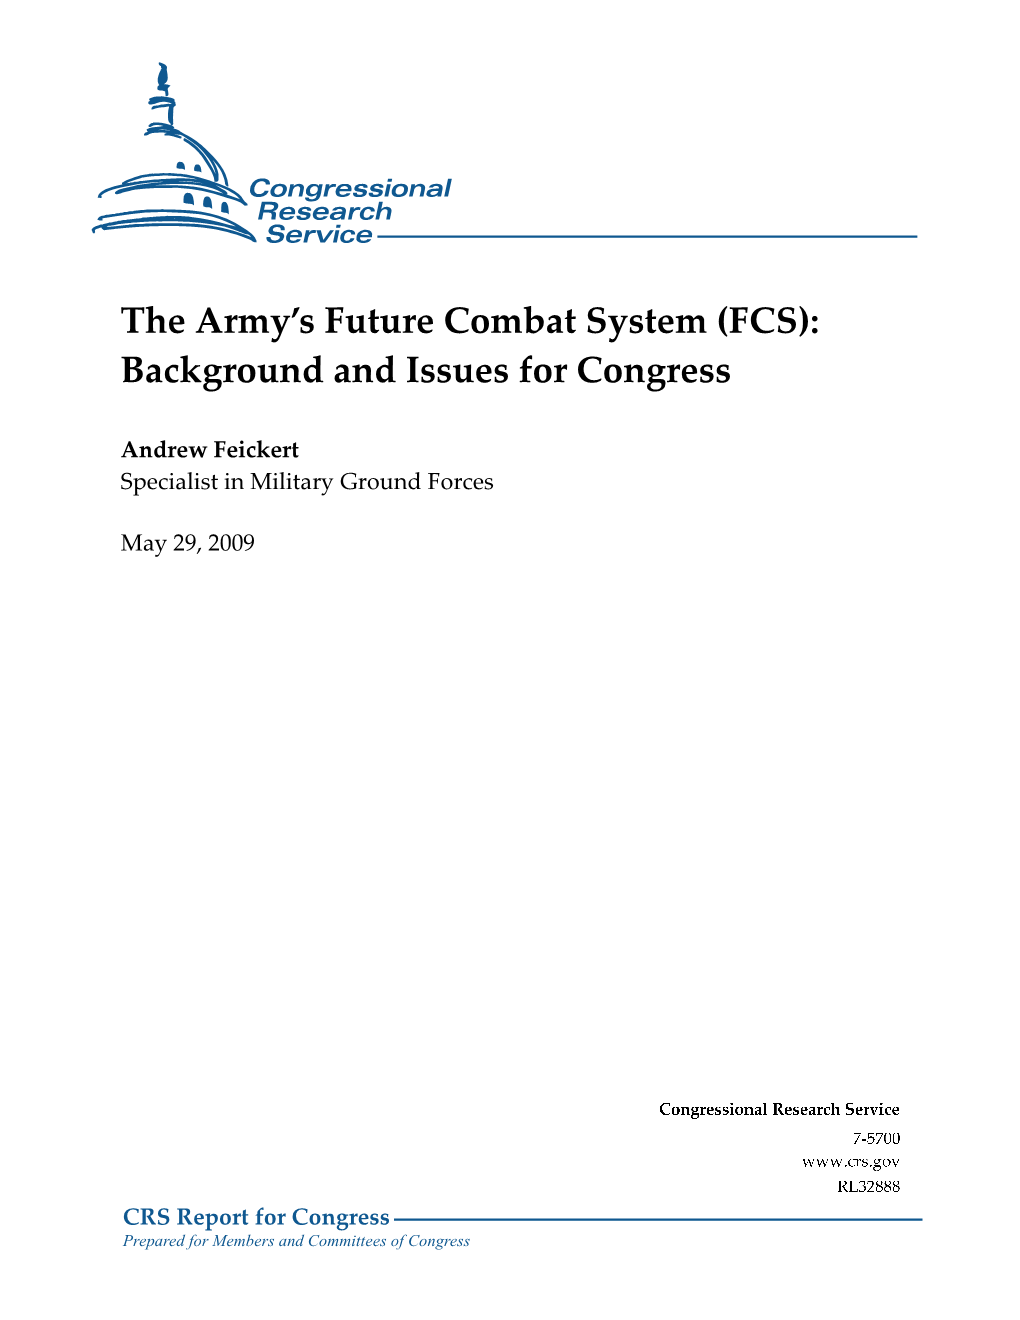 The Army's Future Combat System (FCS)